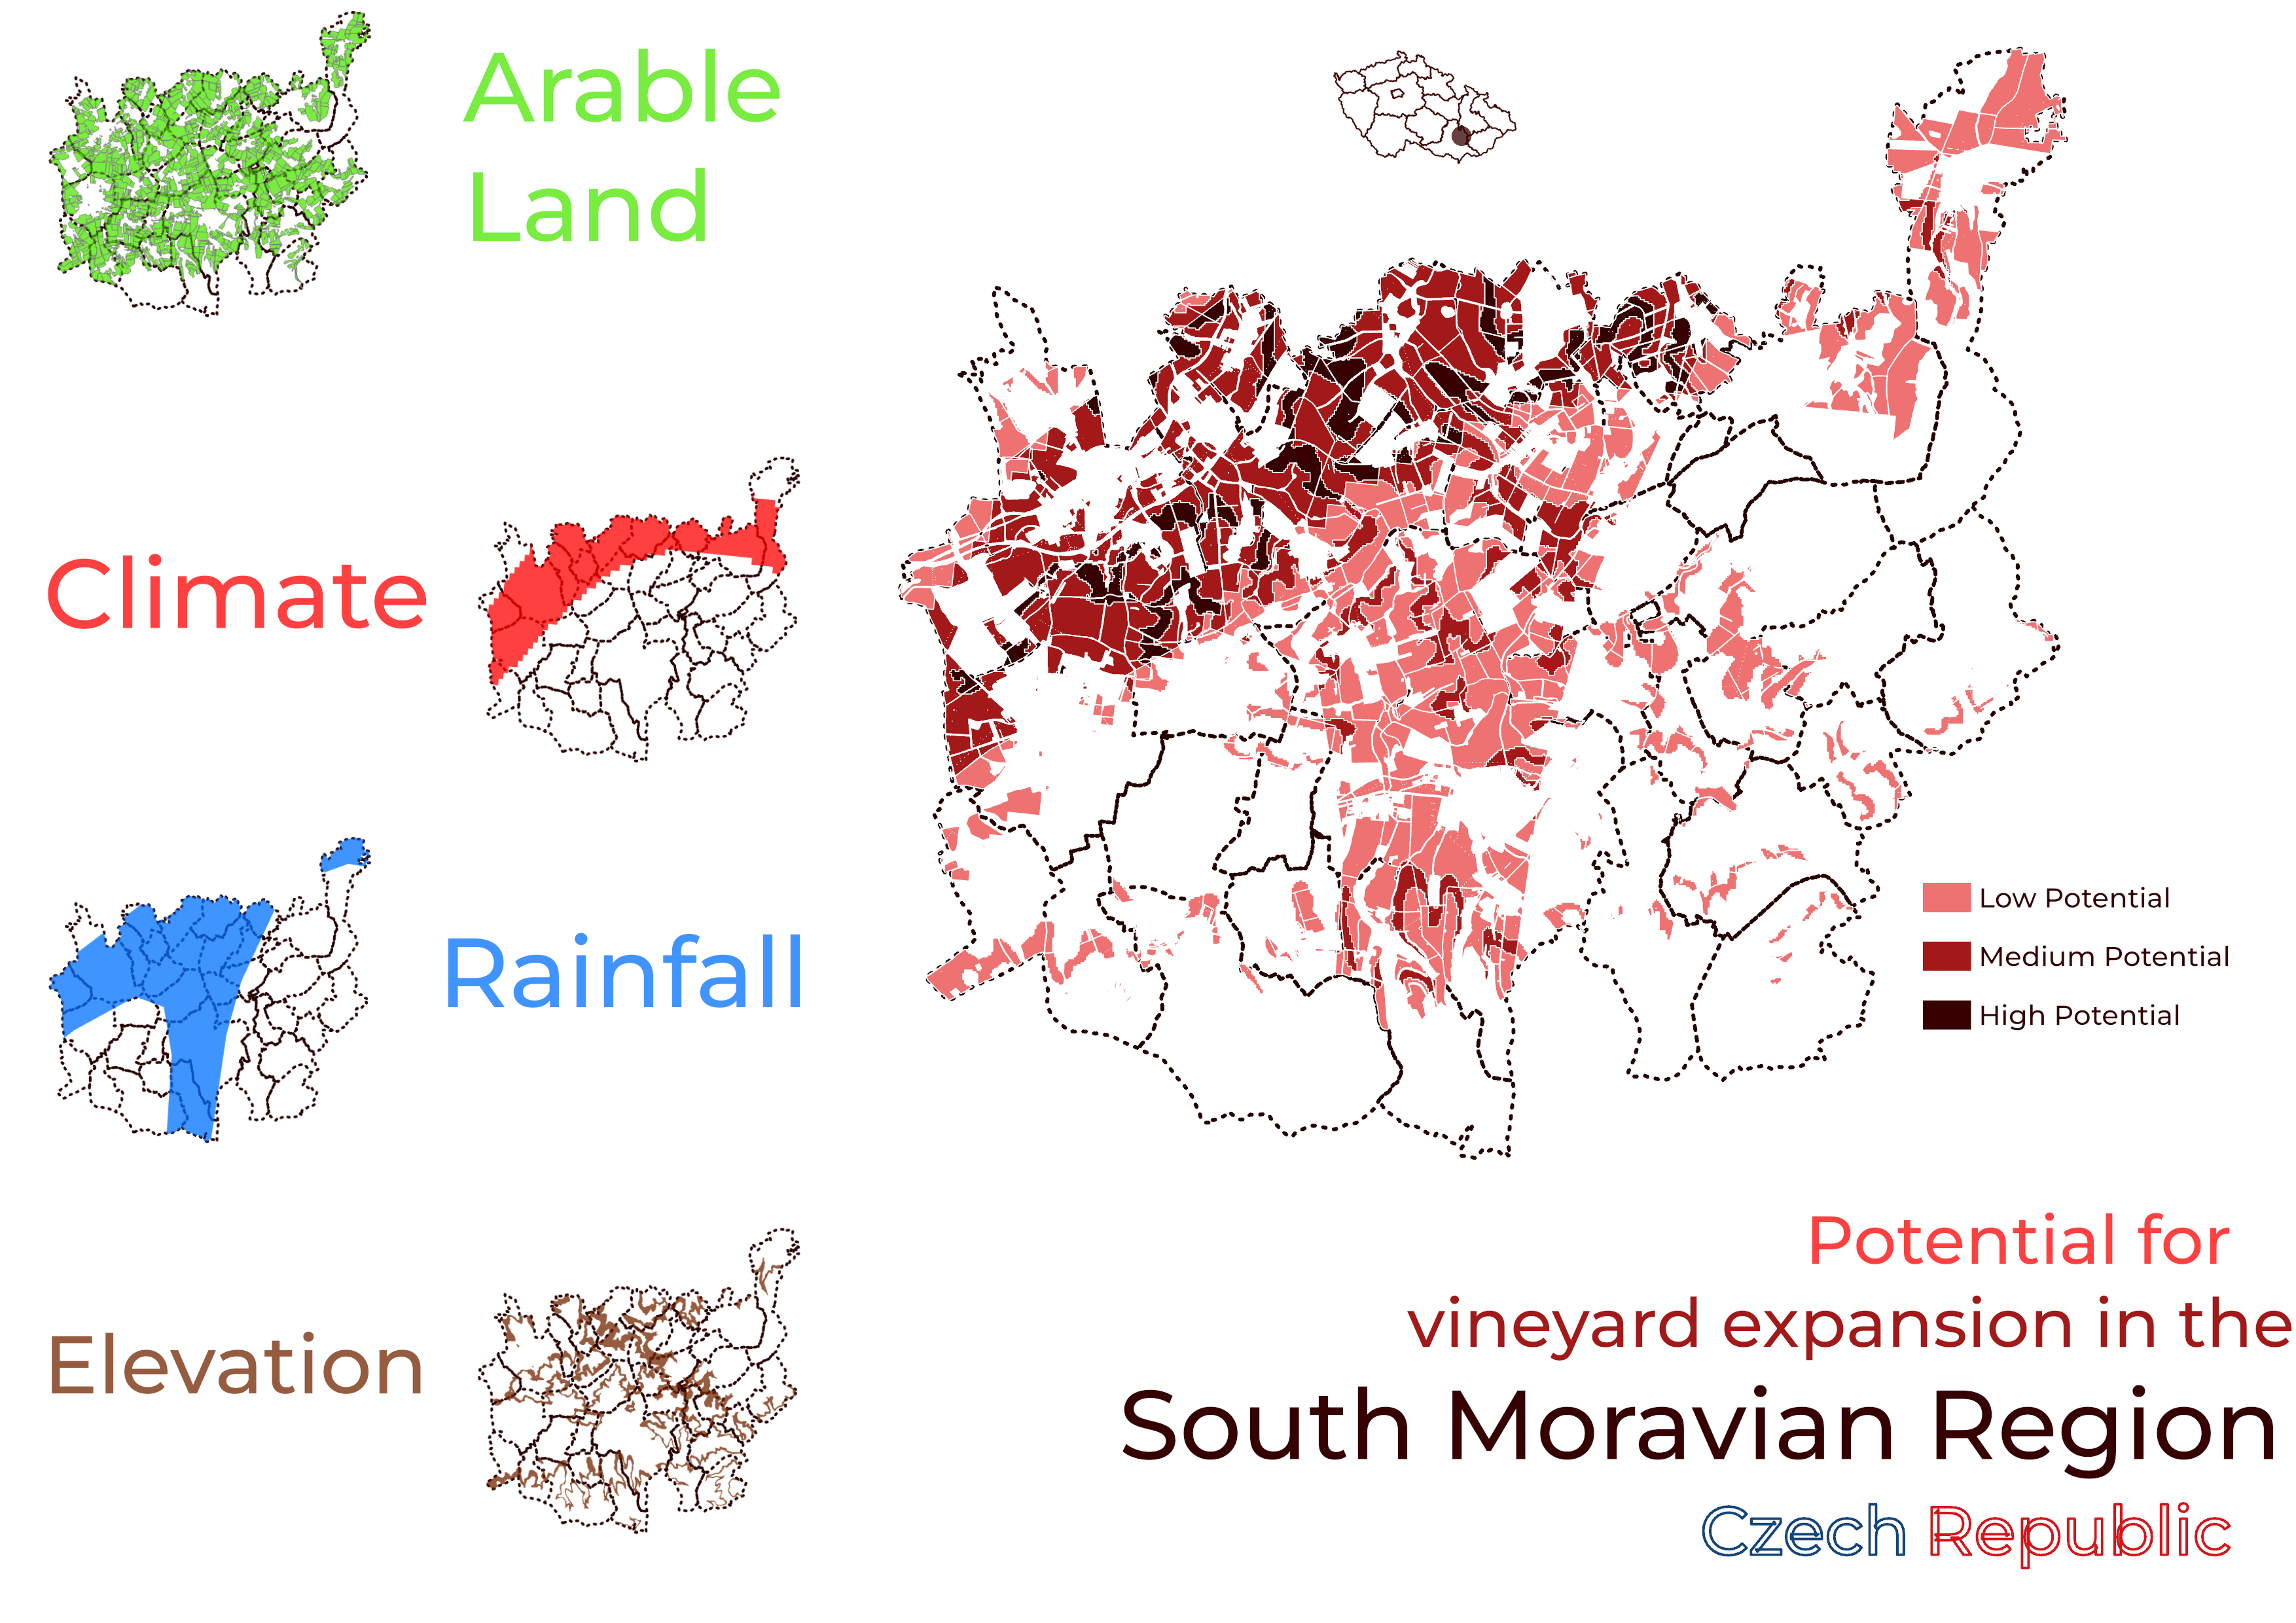 Vineyard expansion in South Moravia